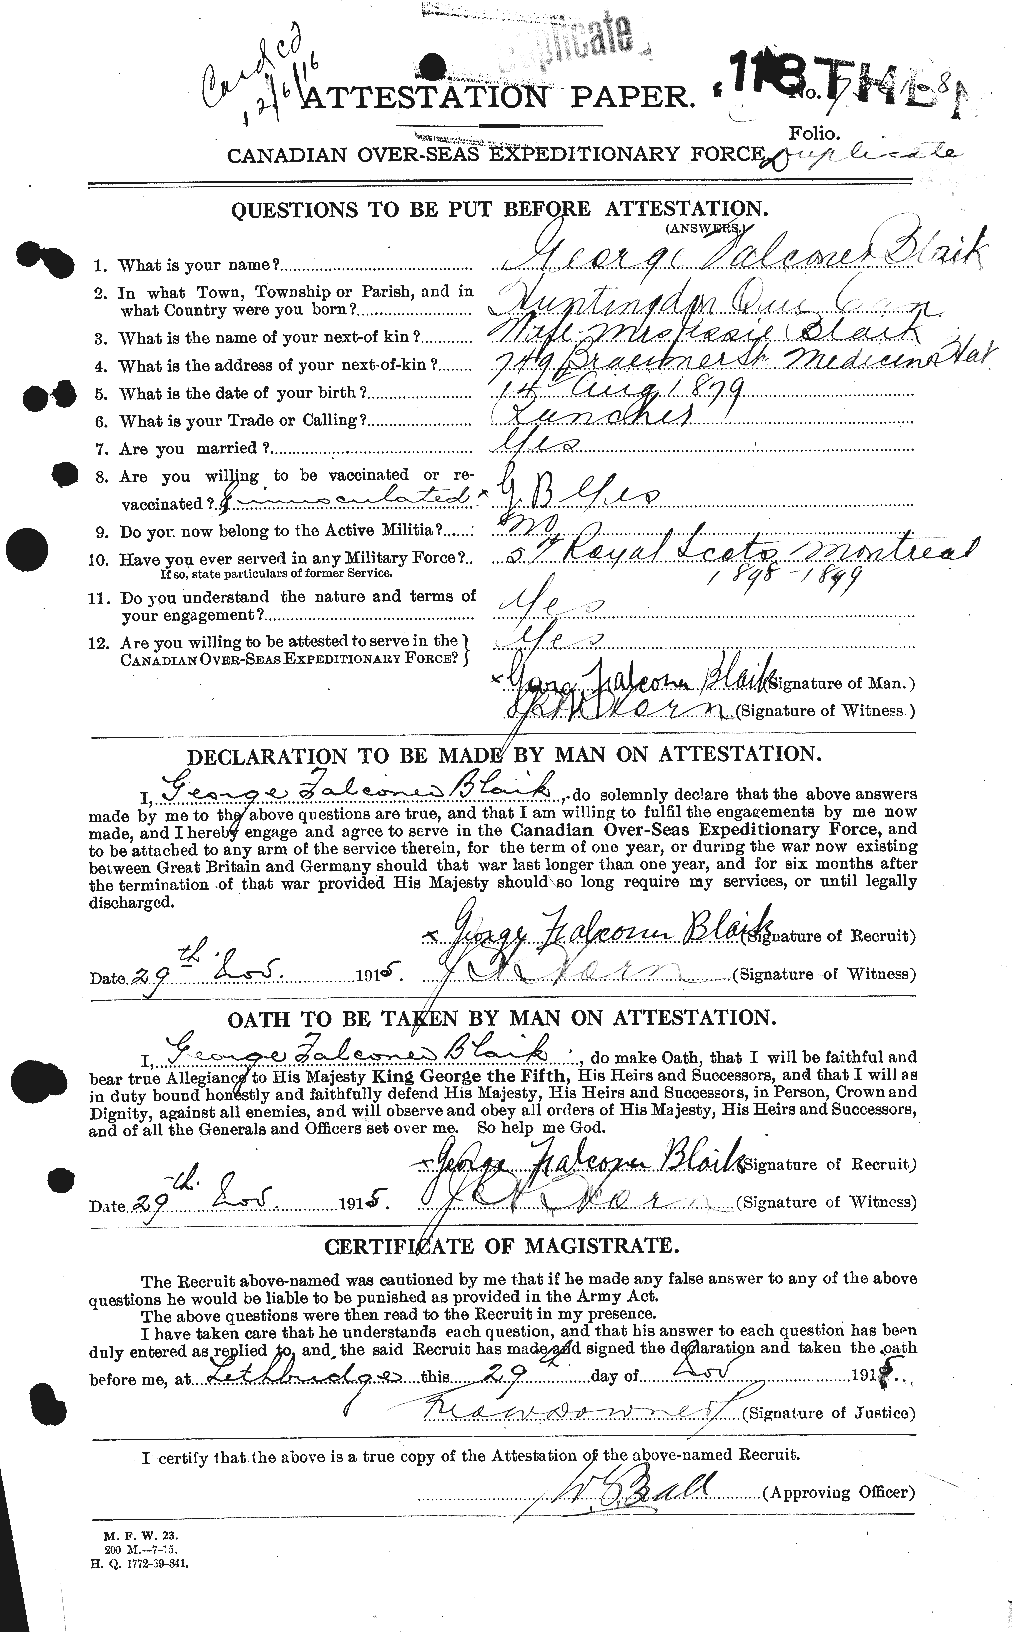 Personnel Records of the First World War - CEF 245958a